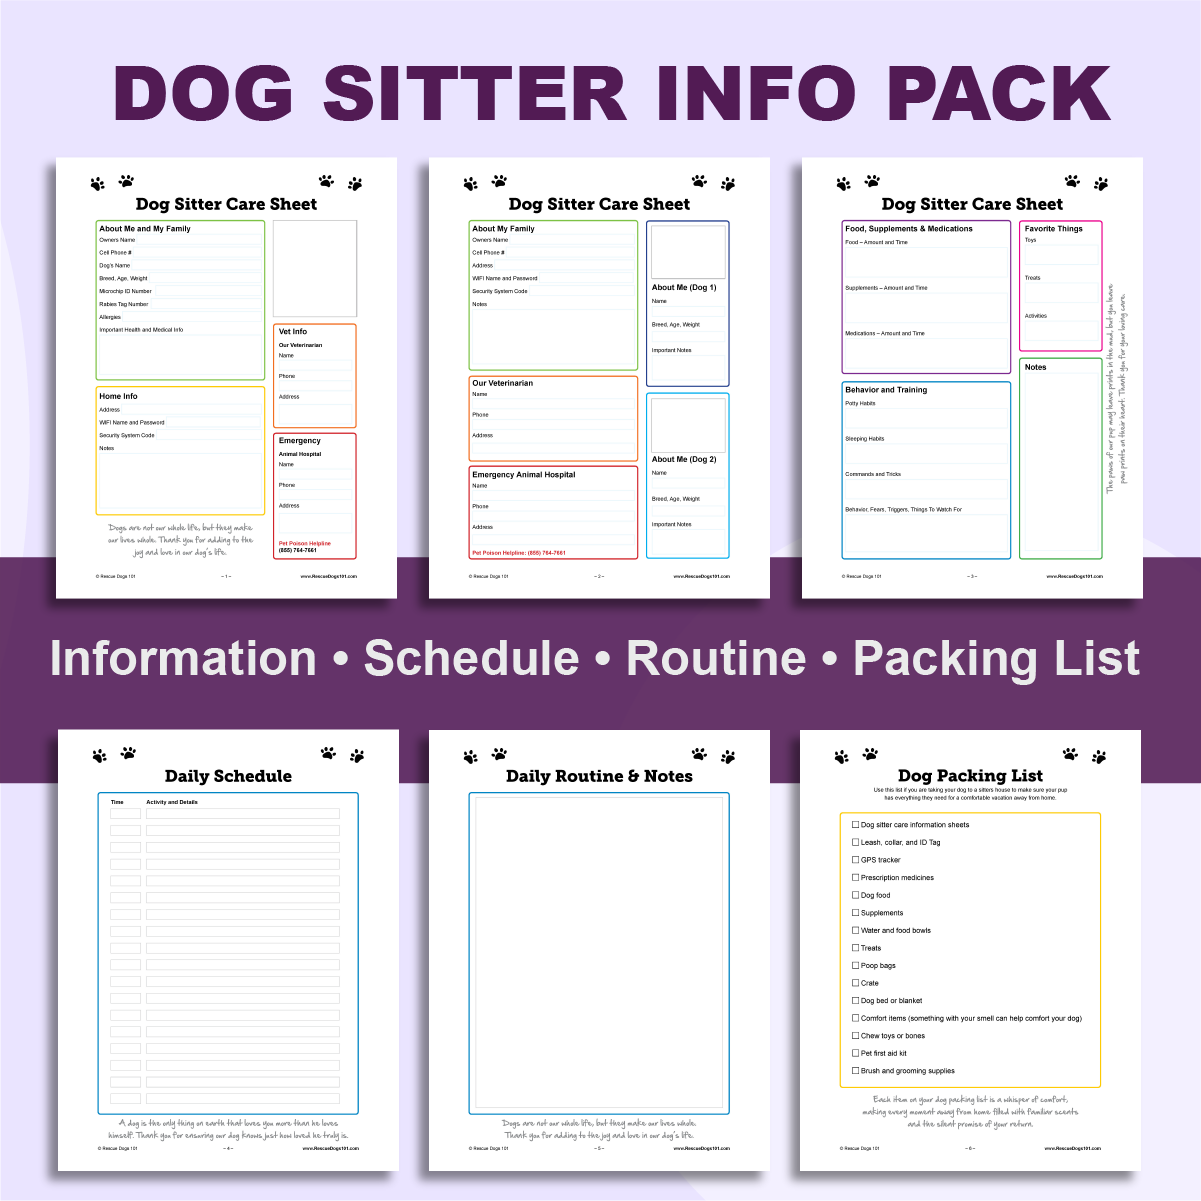 Dog sitter info pack with 6 pages, information, schedule, routine, packing list.